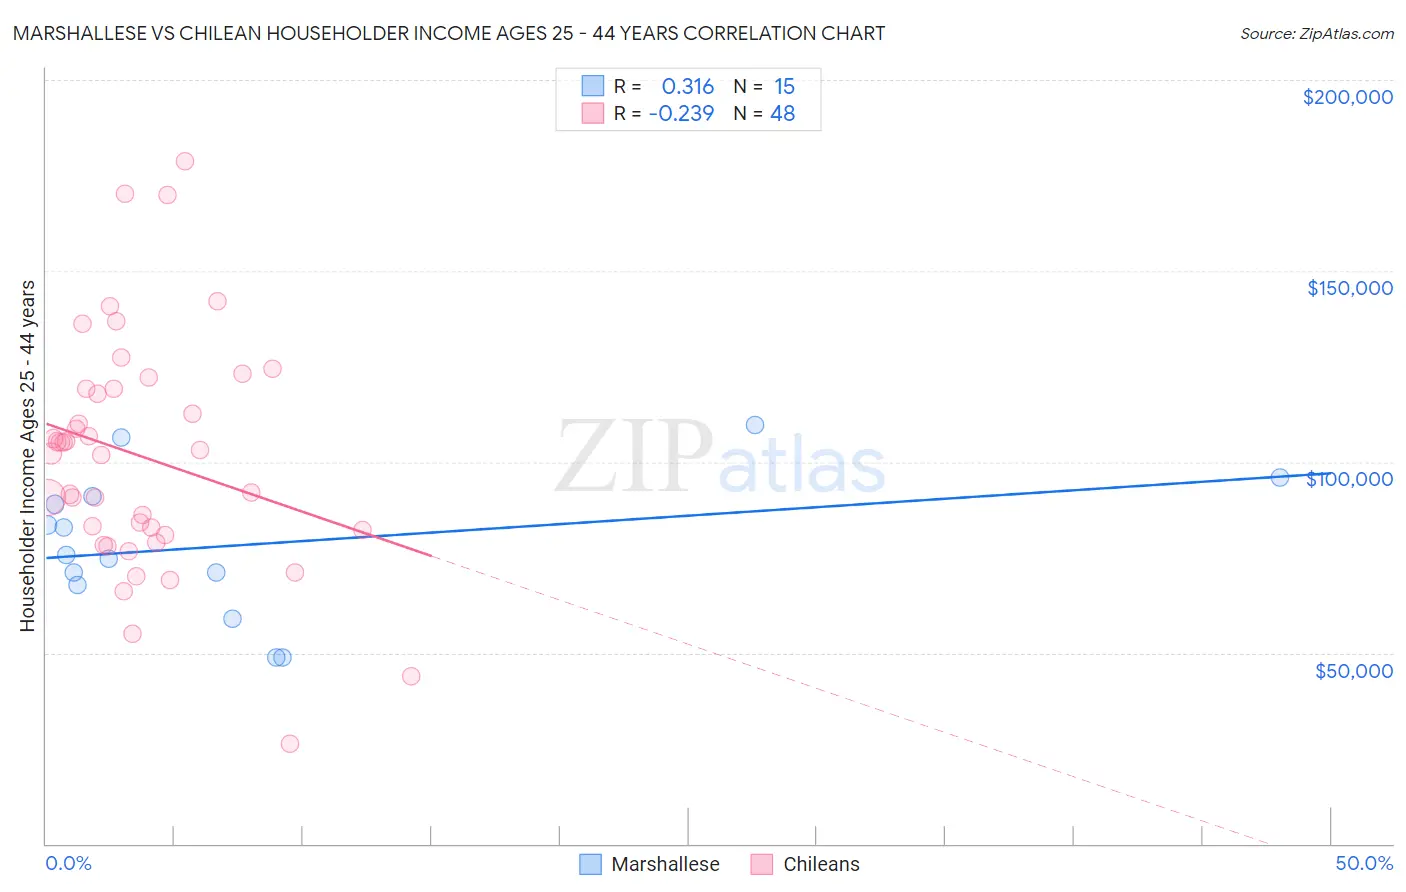 Marshallese vs Chilean Householder Income Ages 25 - 44 years